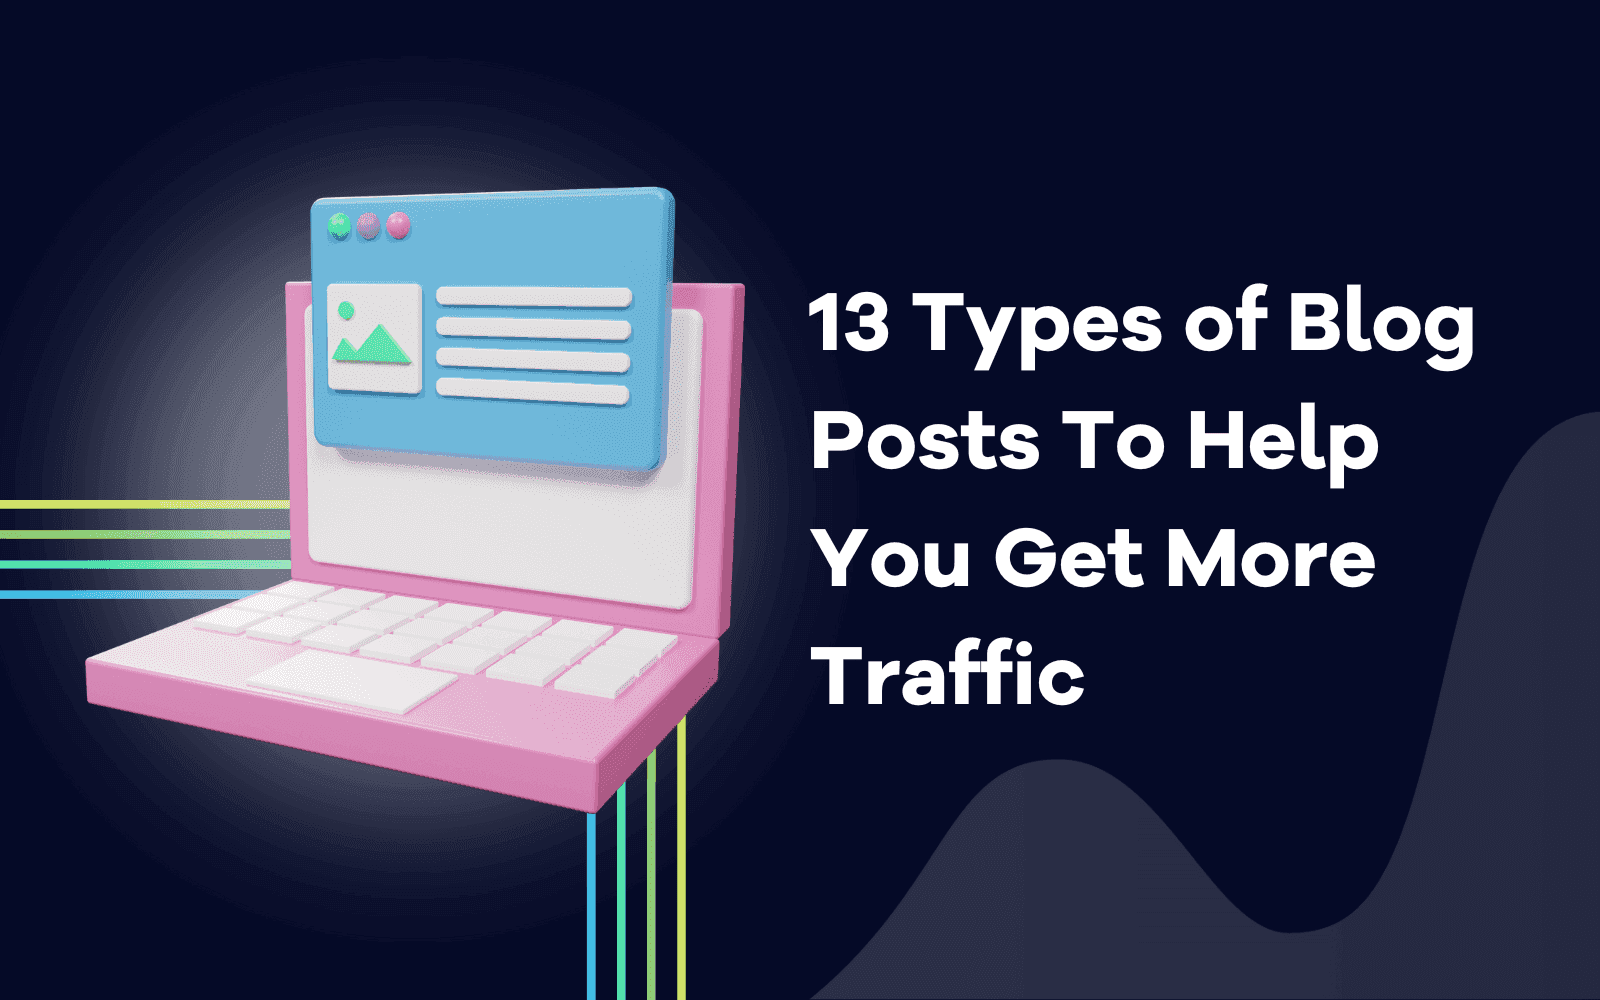 Types of Blog Posts To Help You Get More Traffic